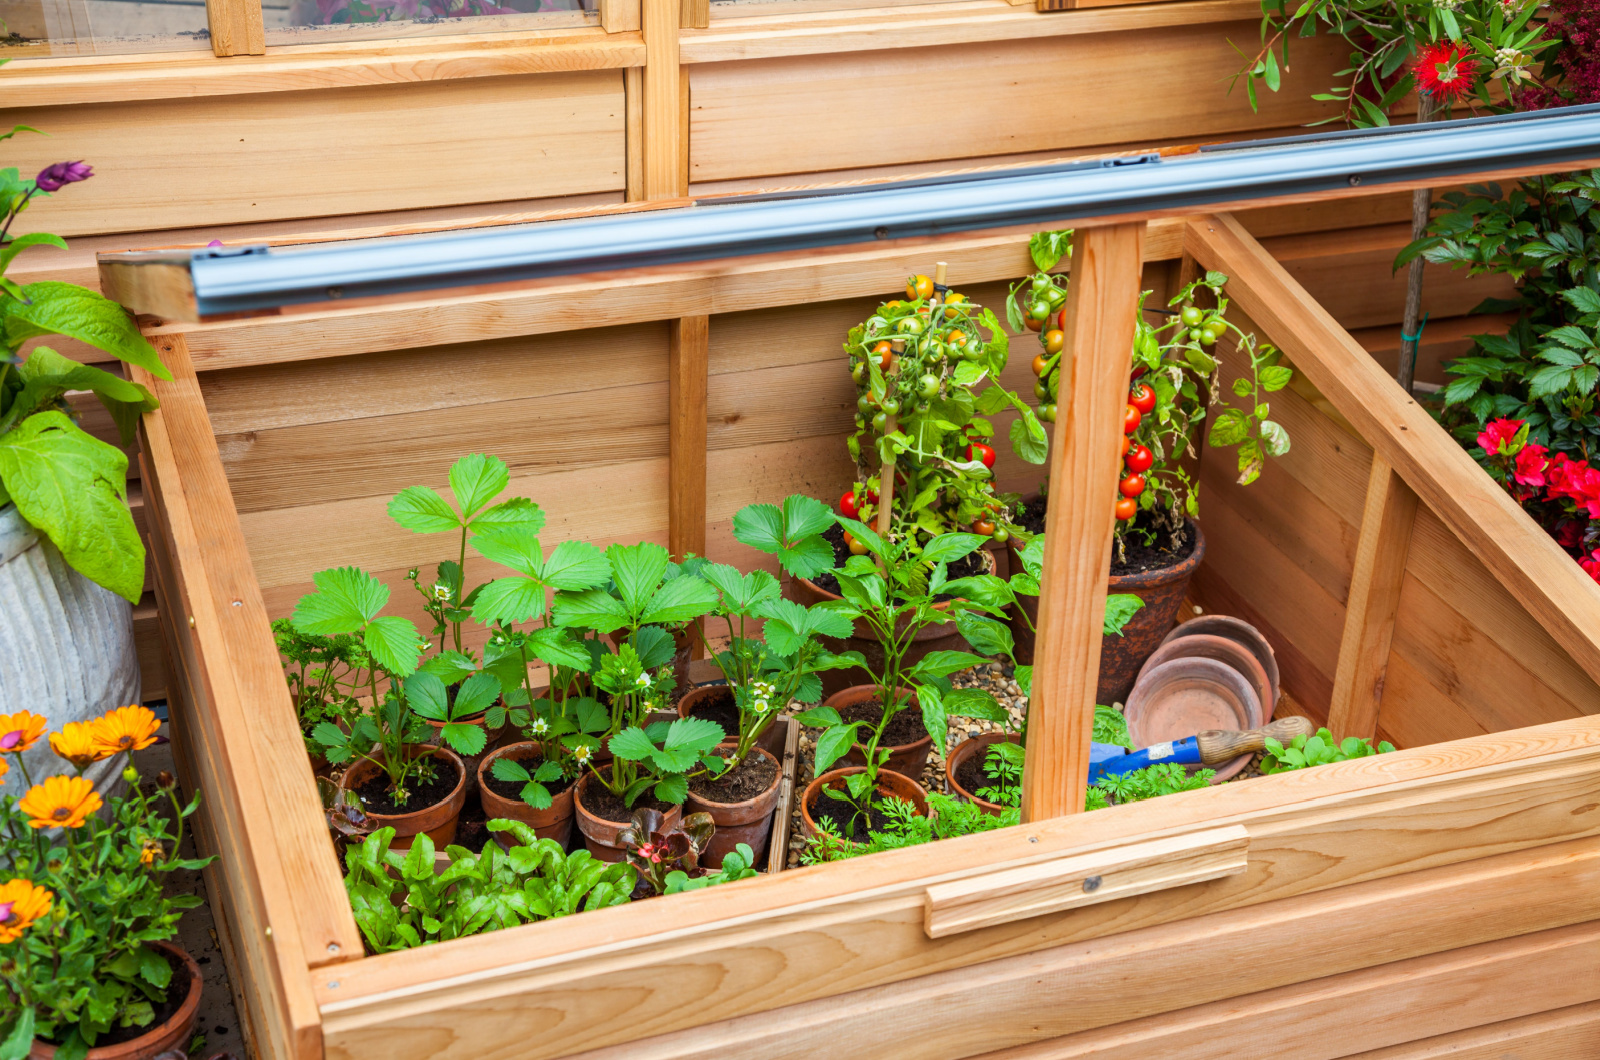 Outdoor wooden cold frame for growing seedlings